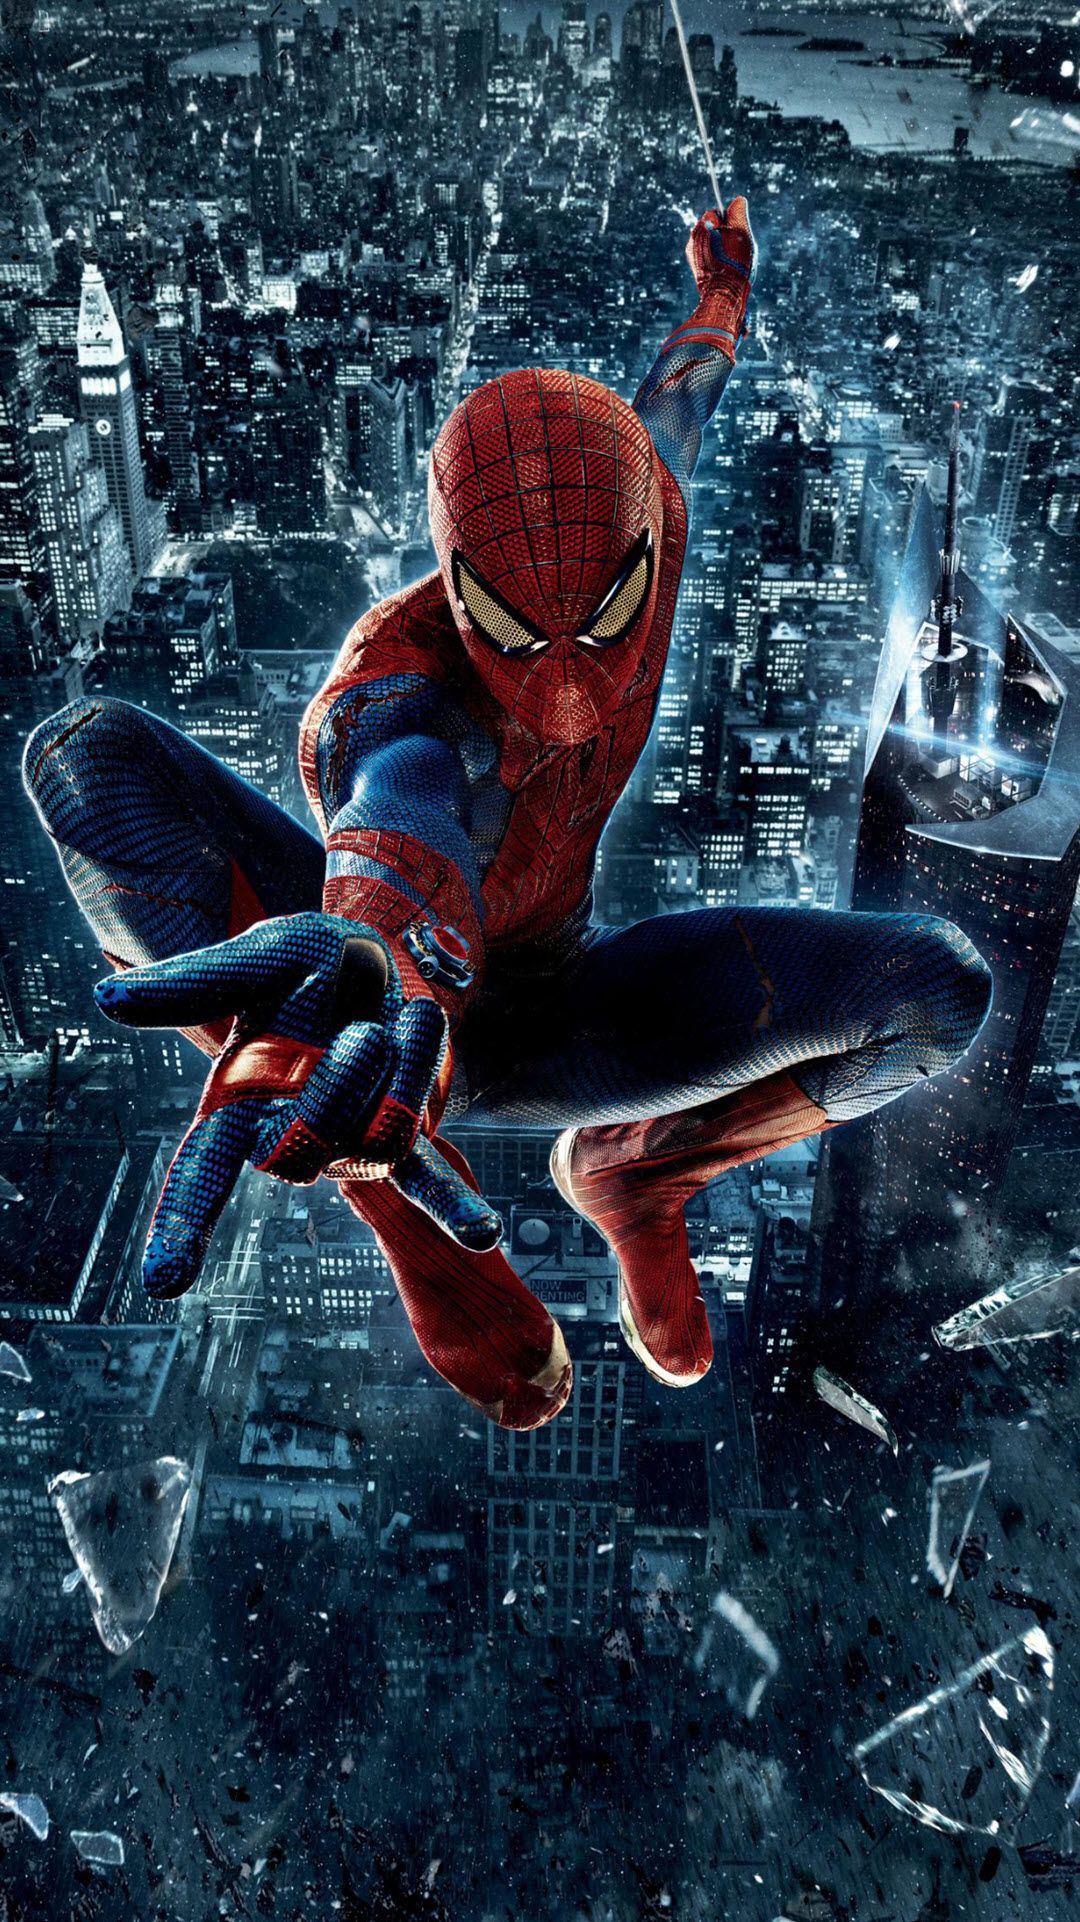 Spiderman wallpaper for iPhone